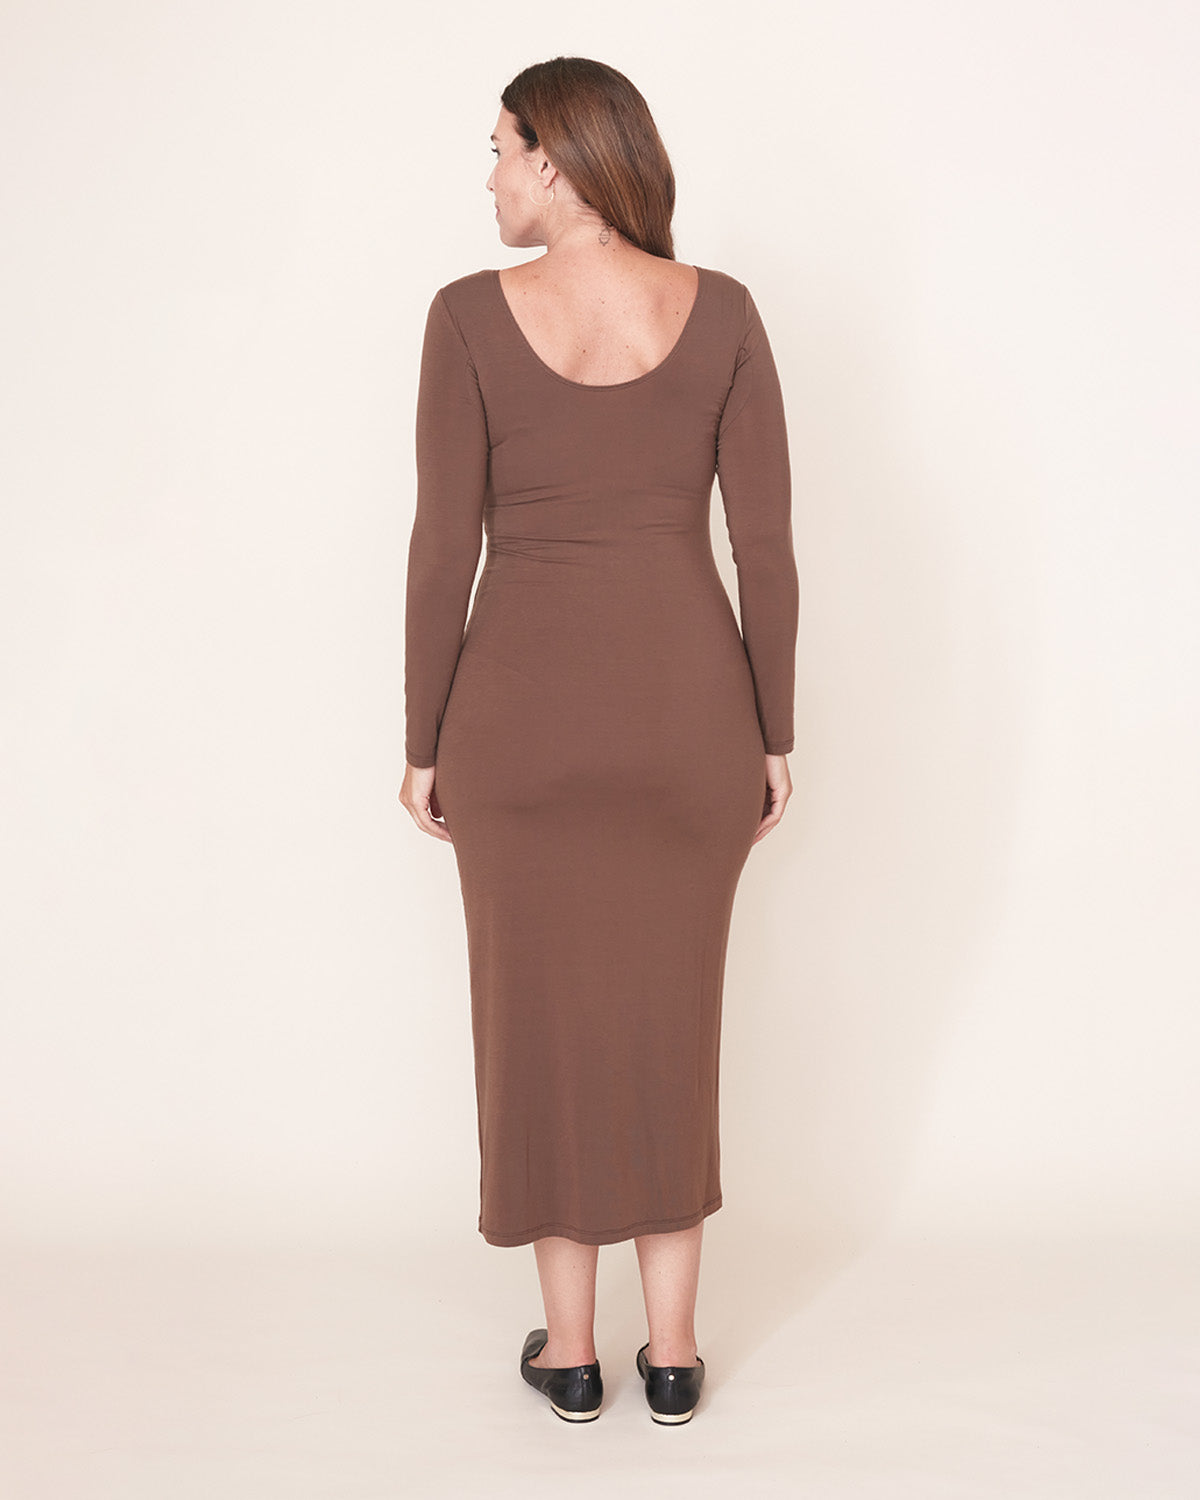 "#color_ESPRESSO|Ashleigh is 5'10", wearing a size M